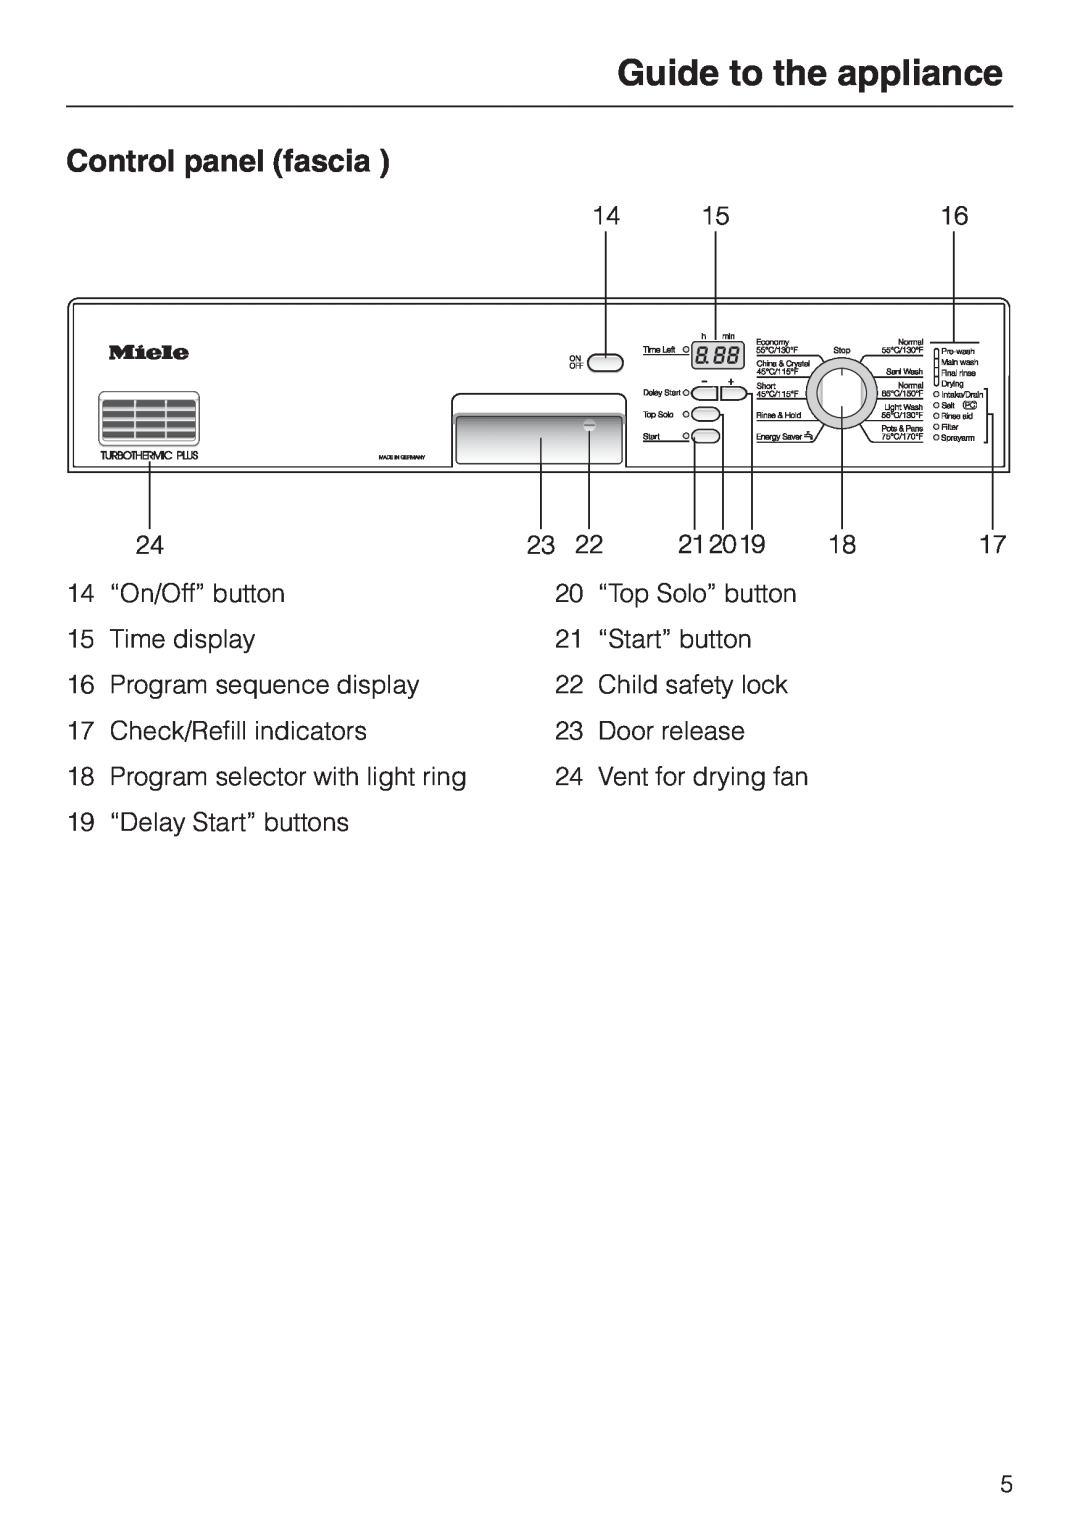 Miele G 886 manual Guide to the appliance, Control panel fascia 